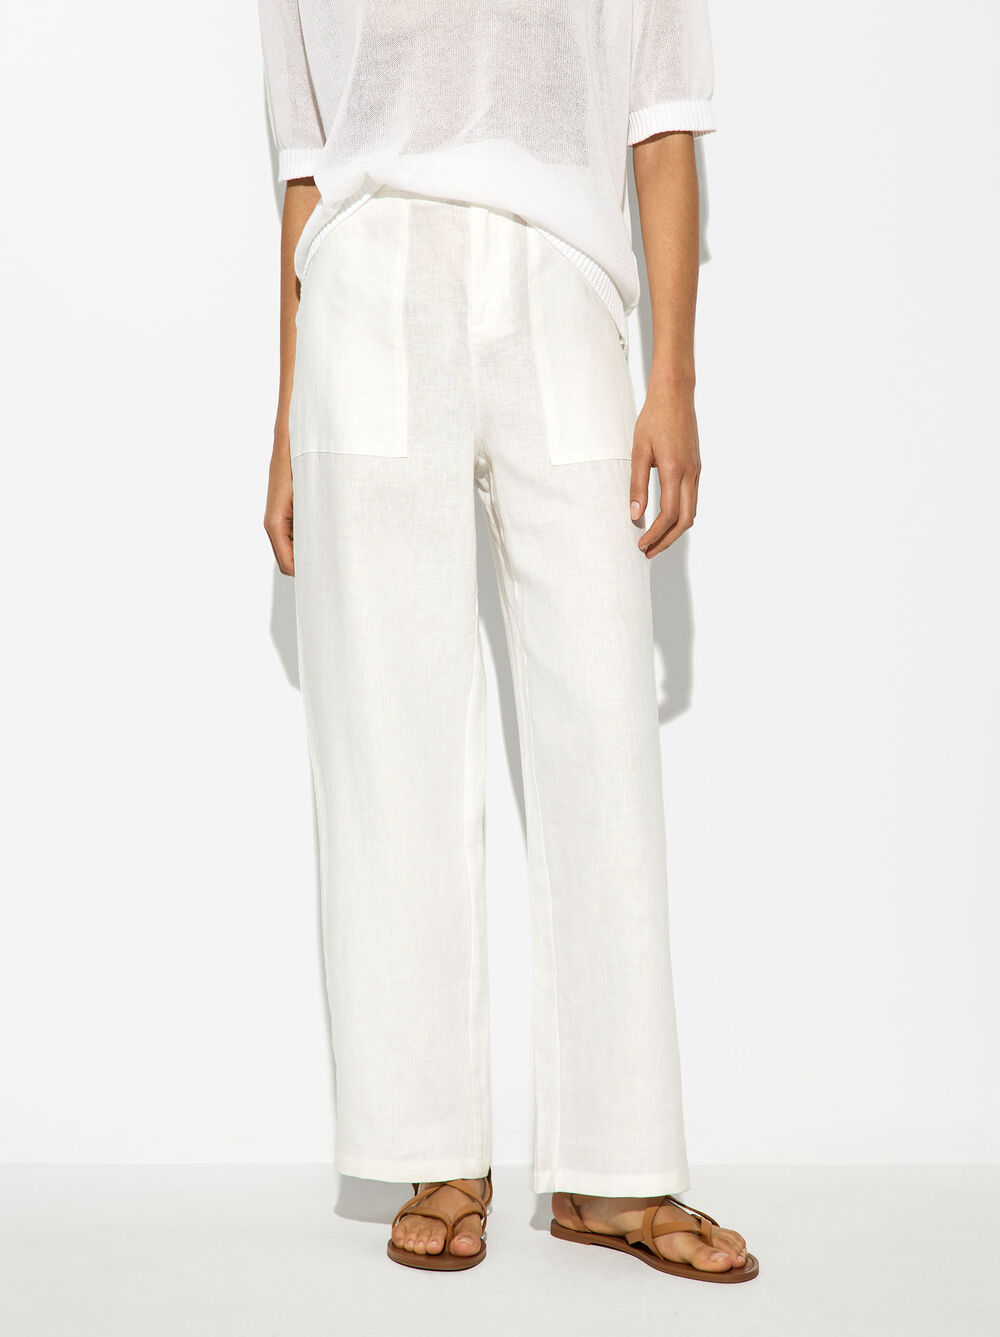 100% Linen Trousers image number 2.0